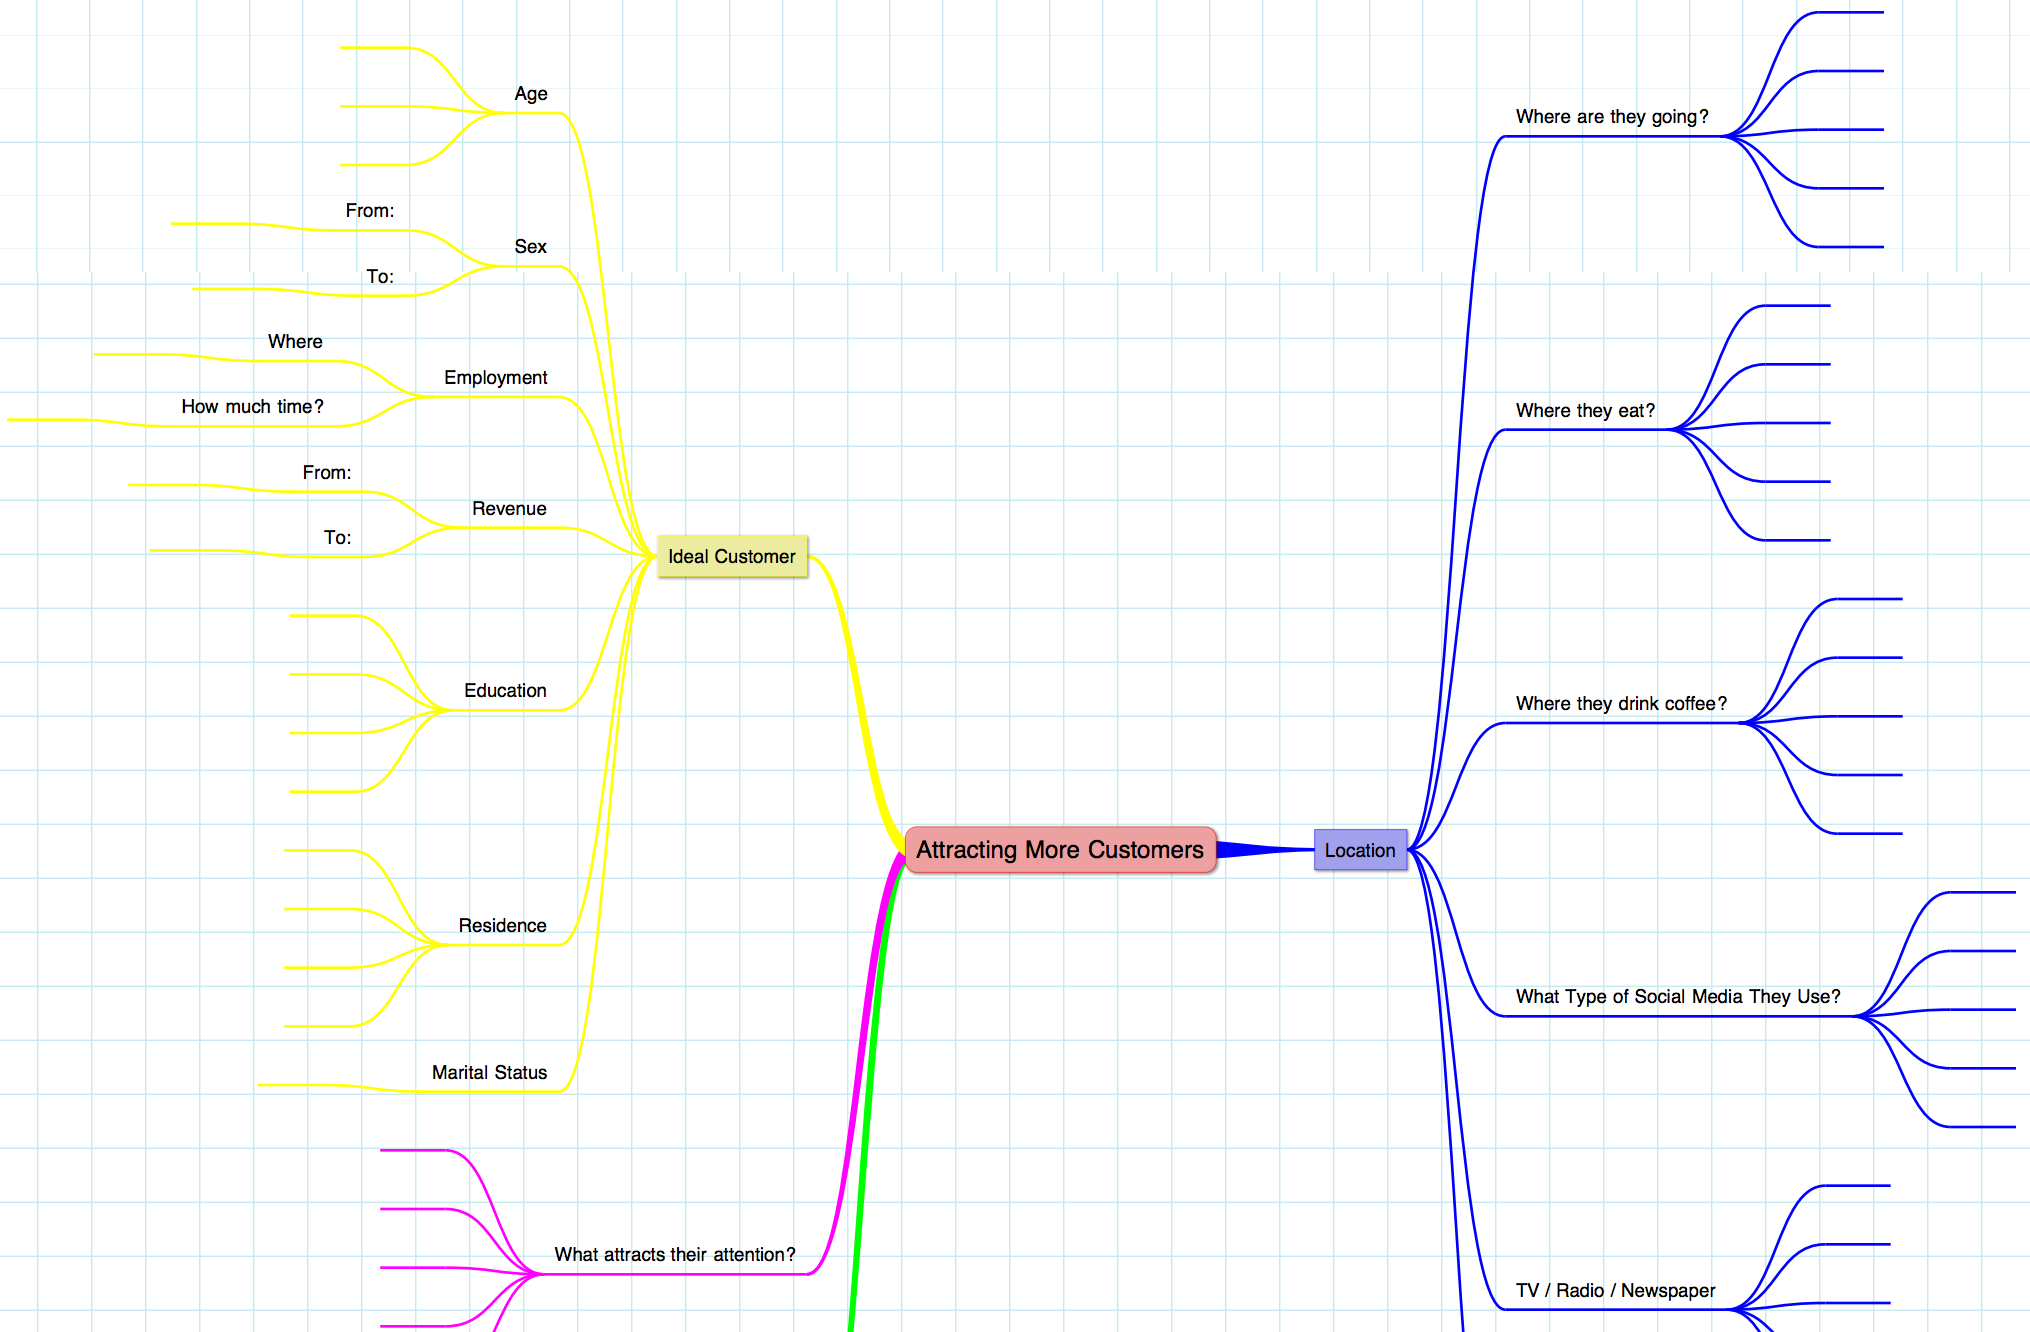 Attract More Customers mindmap